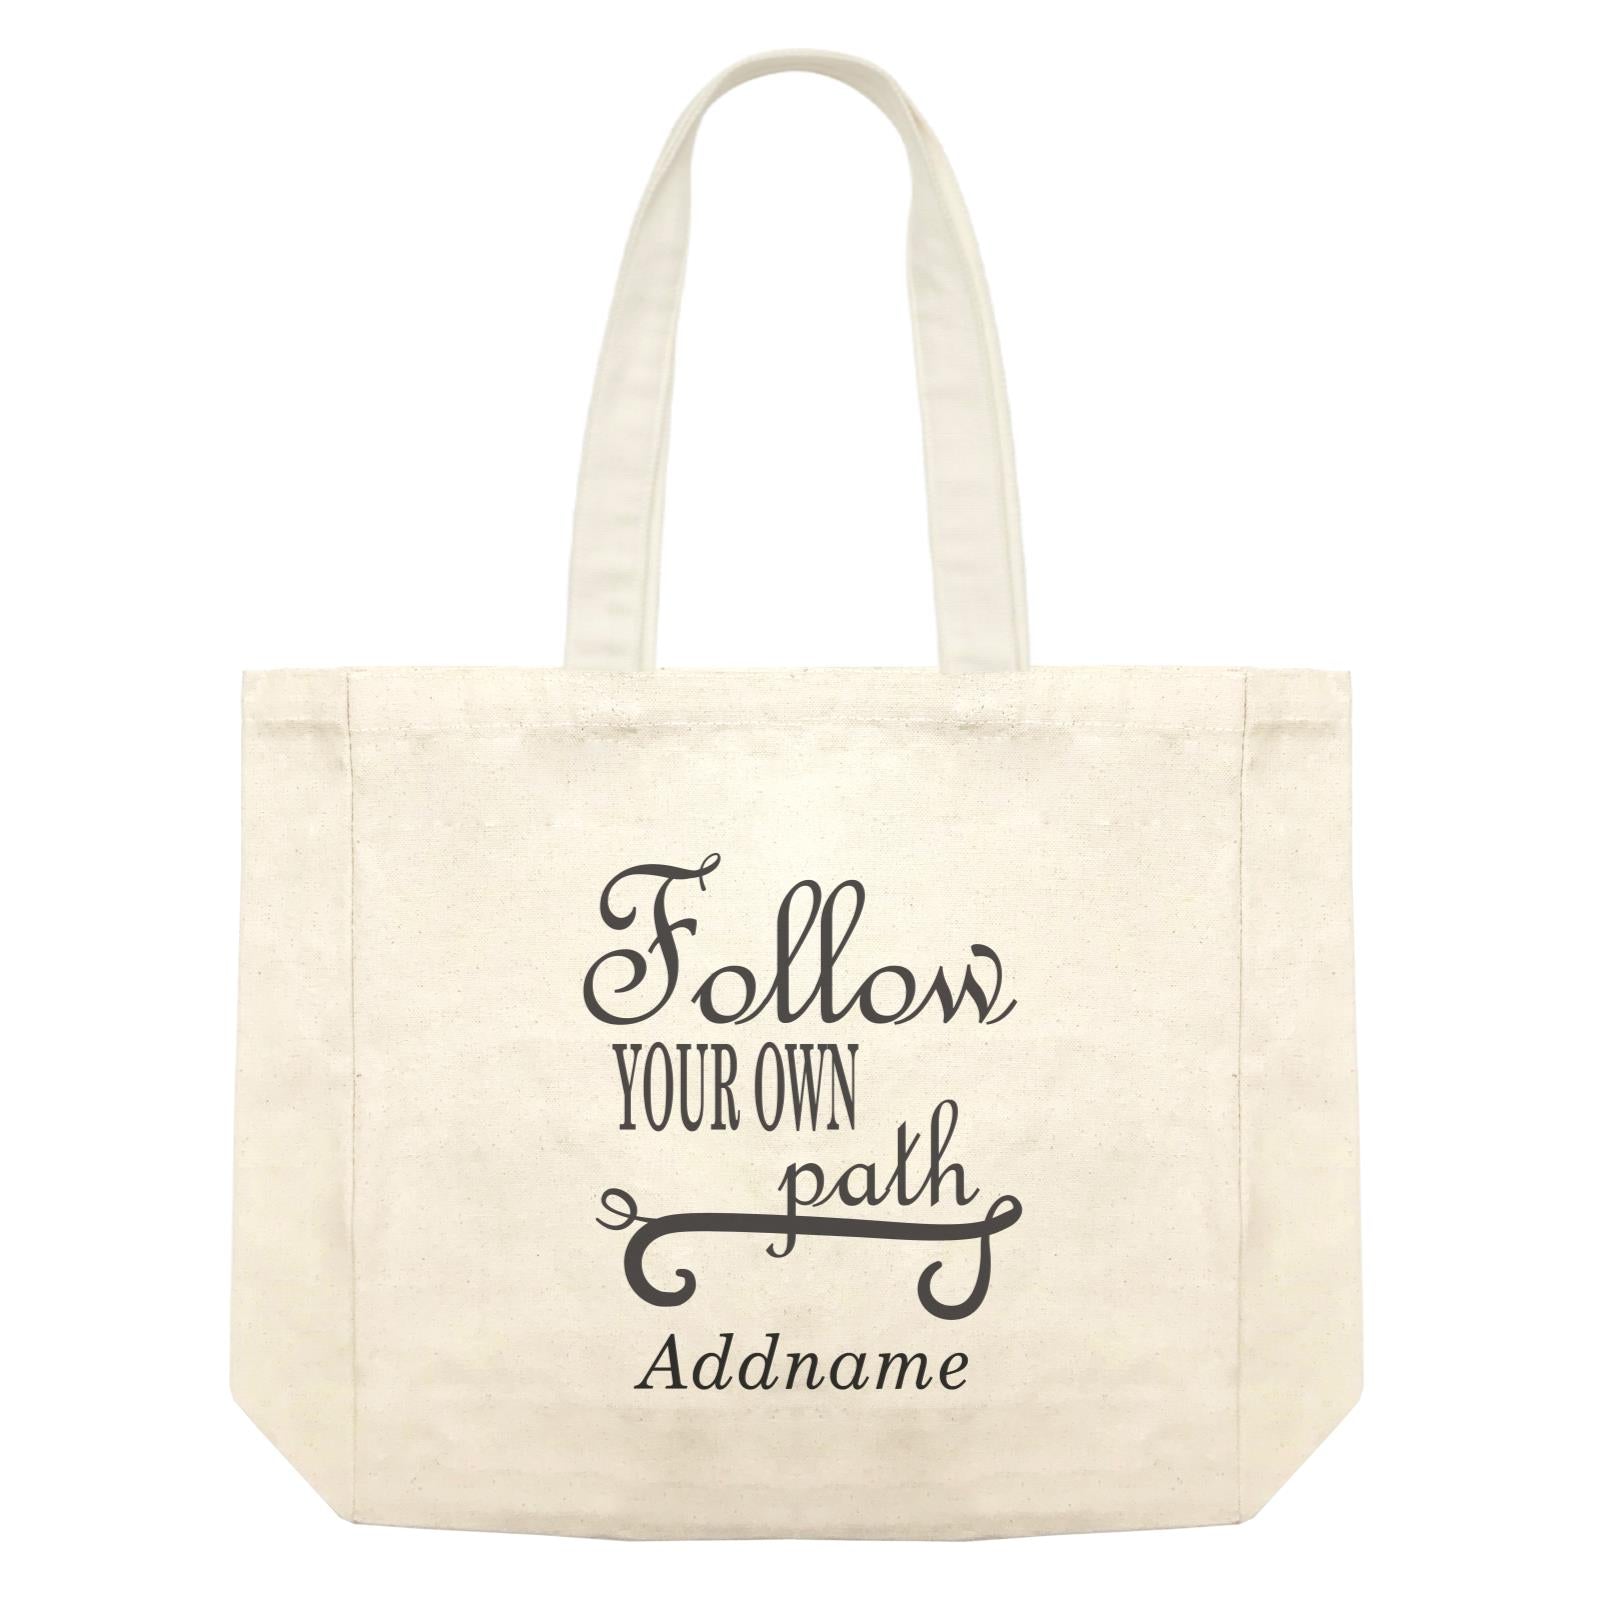 Inspiration Quotes Follow Your Own Path Addname Shopping Bag